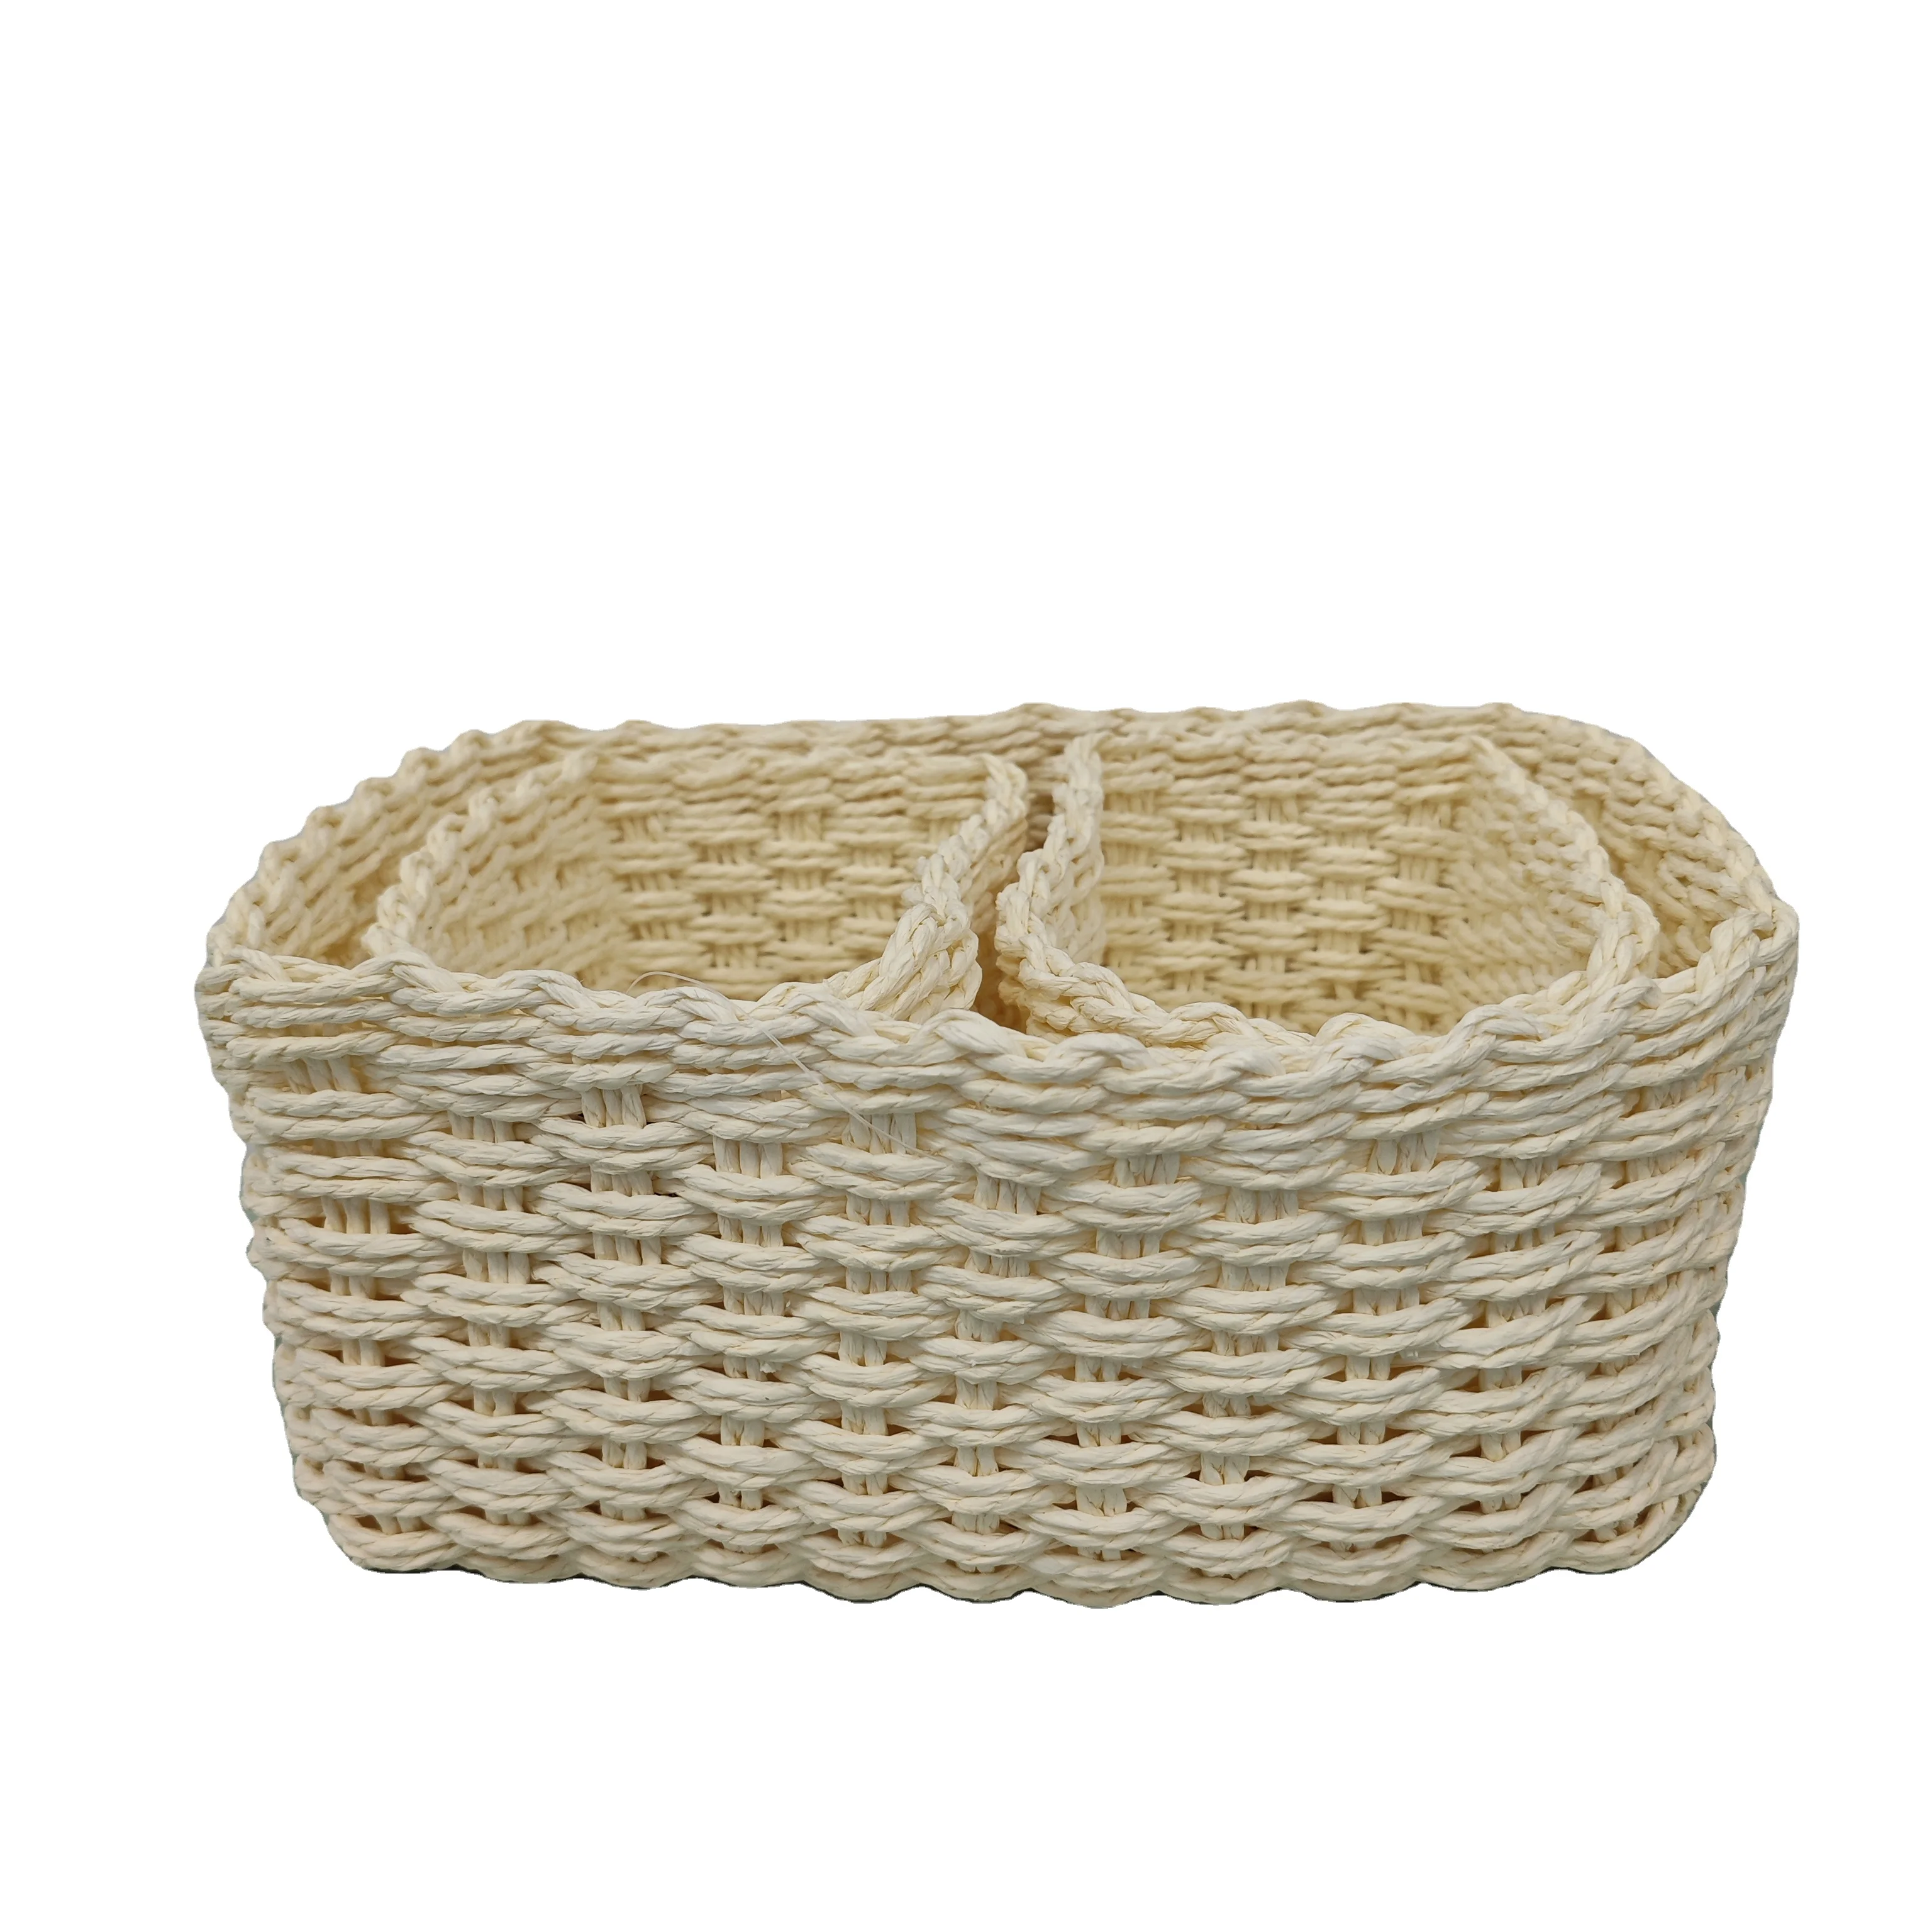 Paper Rope Storage Baskets, Hand-Woven Paper Rope Basket, Paper Rope Baskets for Organizing, Woven Baskets